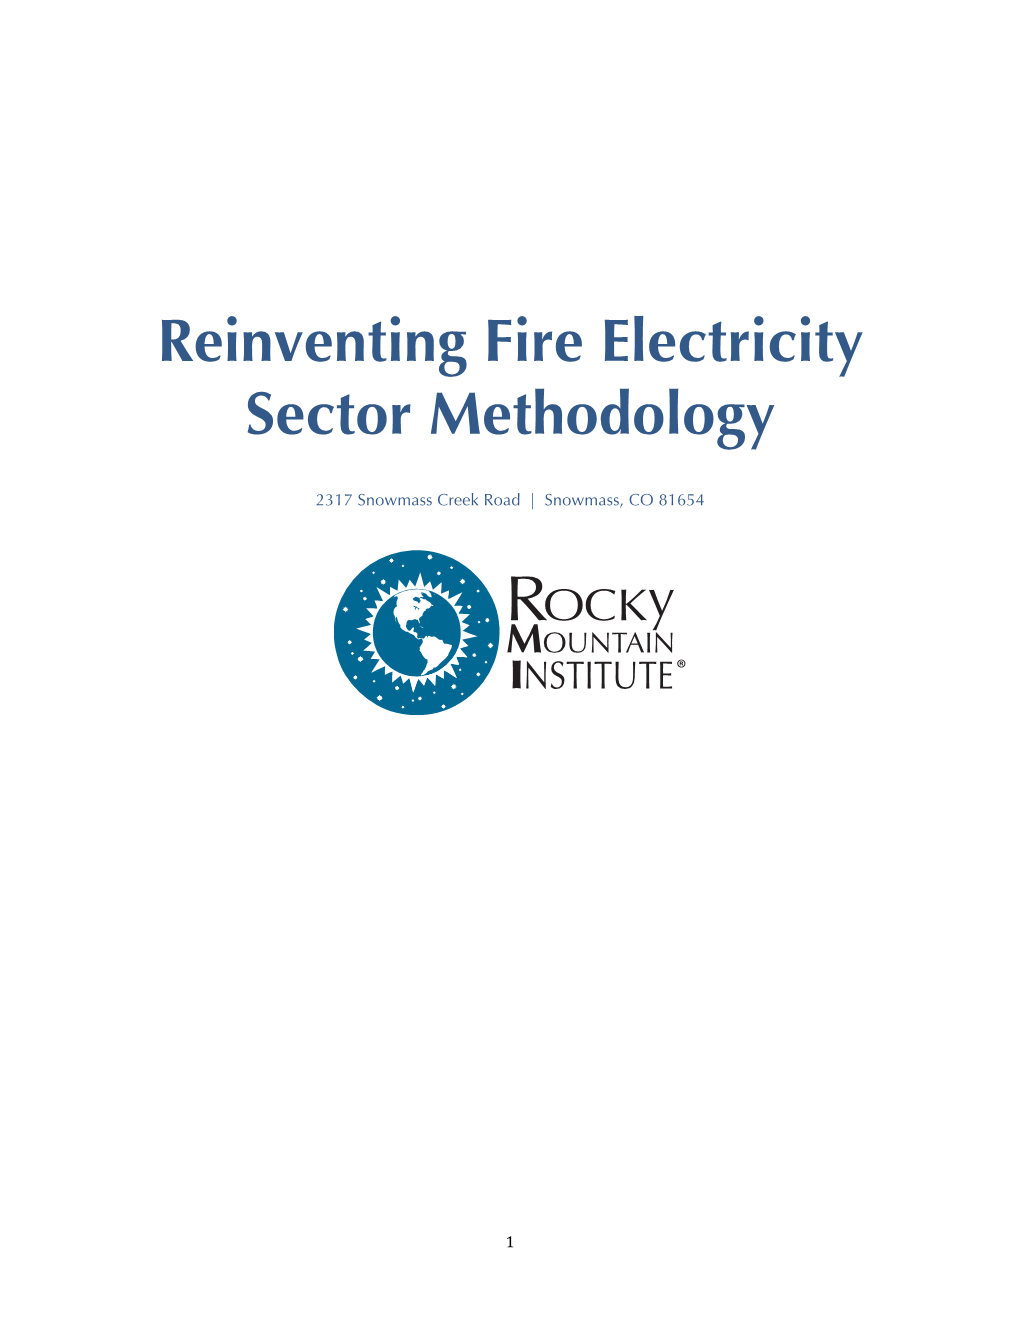 Reinventing Fire Electricity Sector Methodology